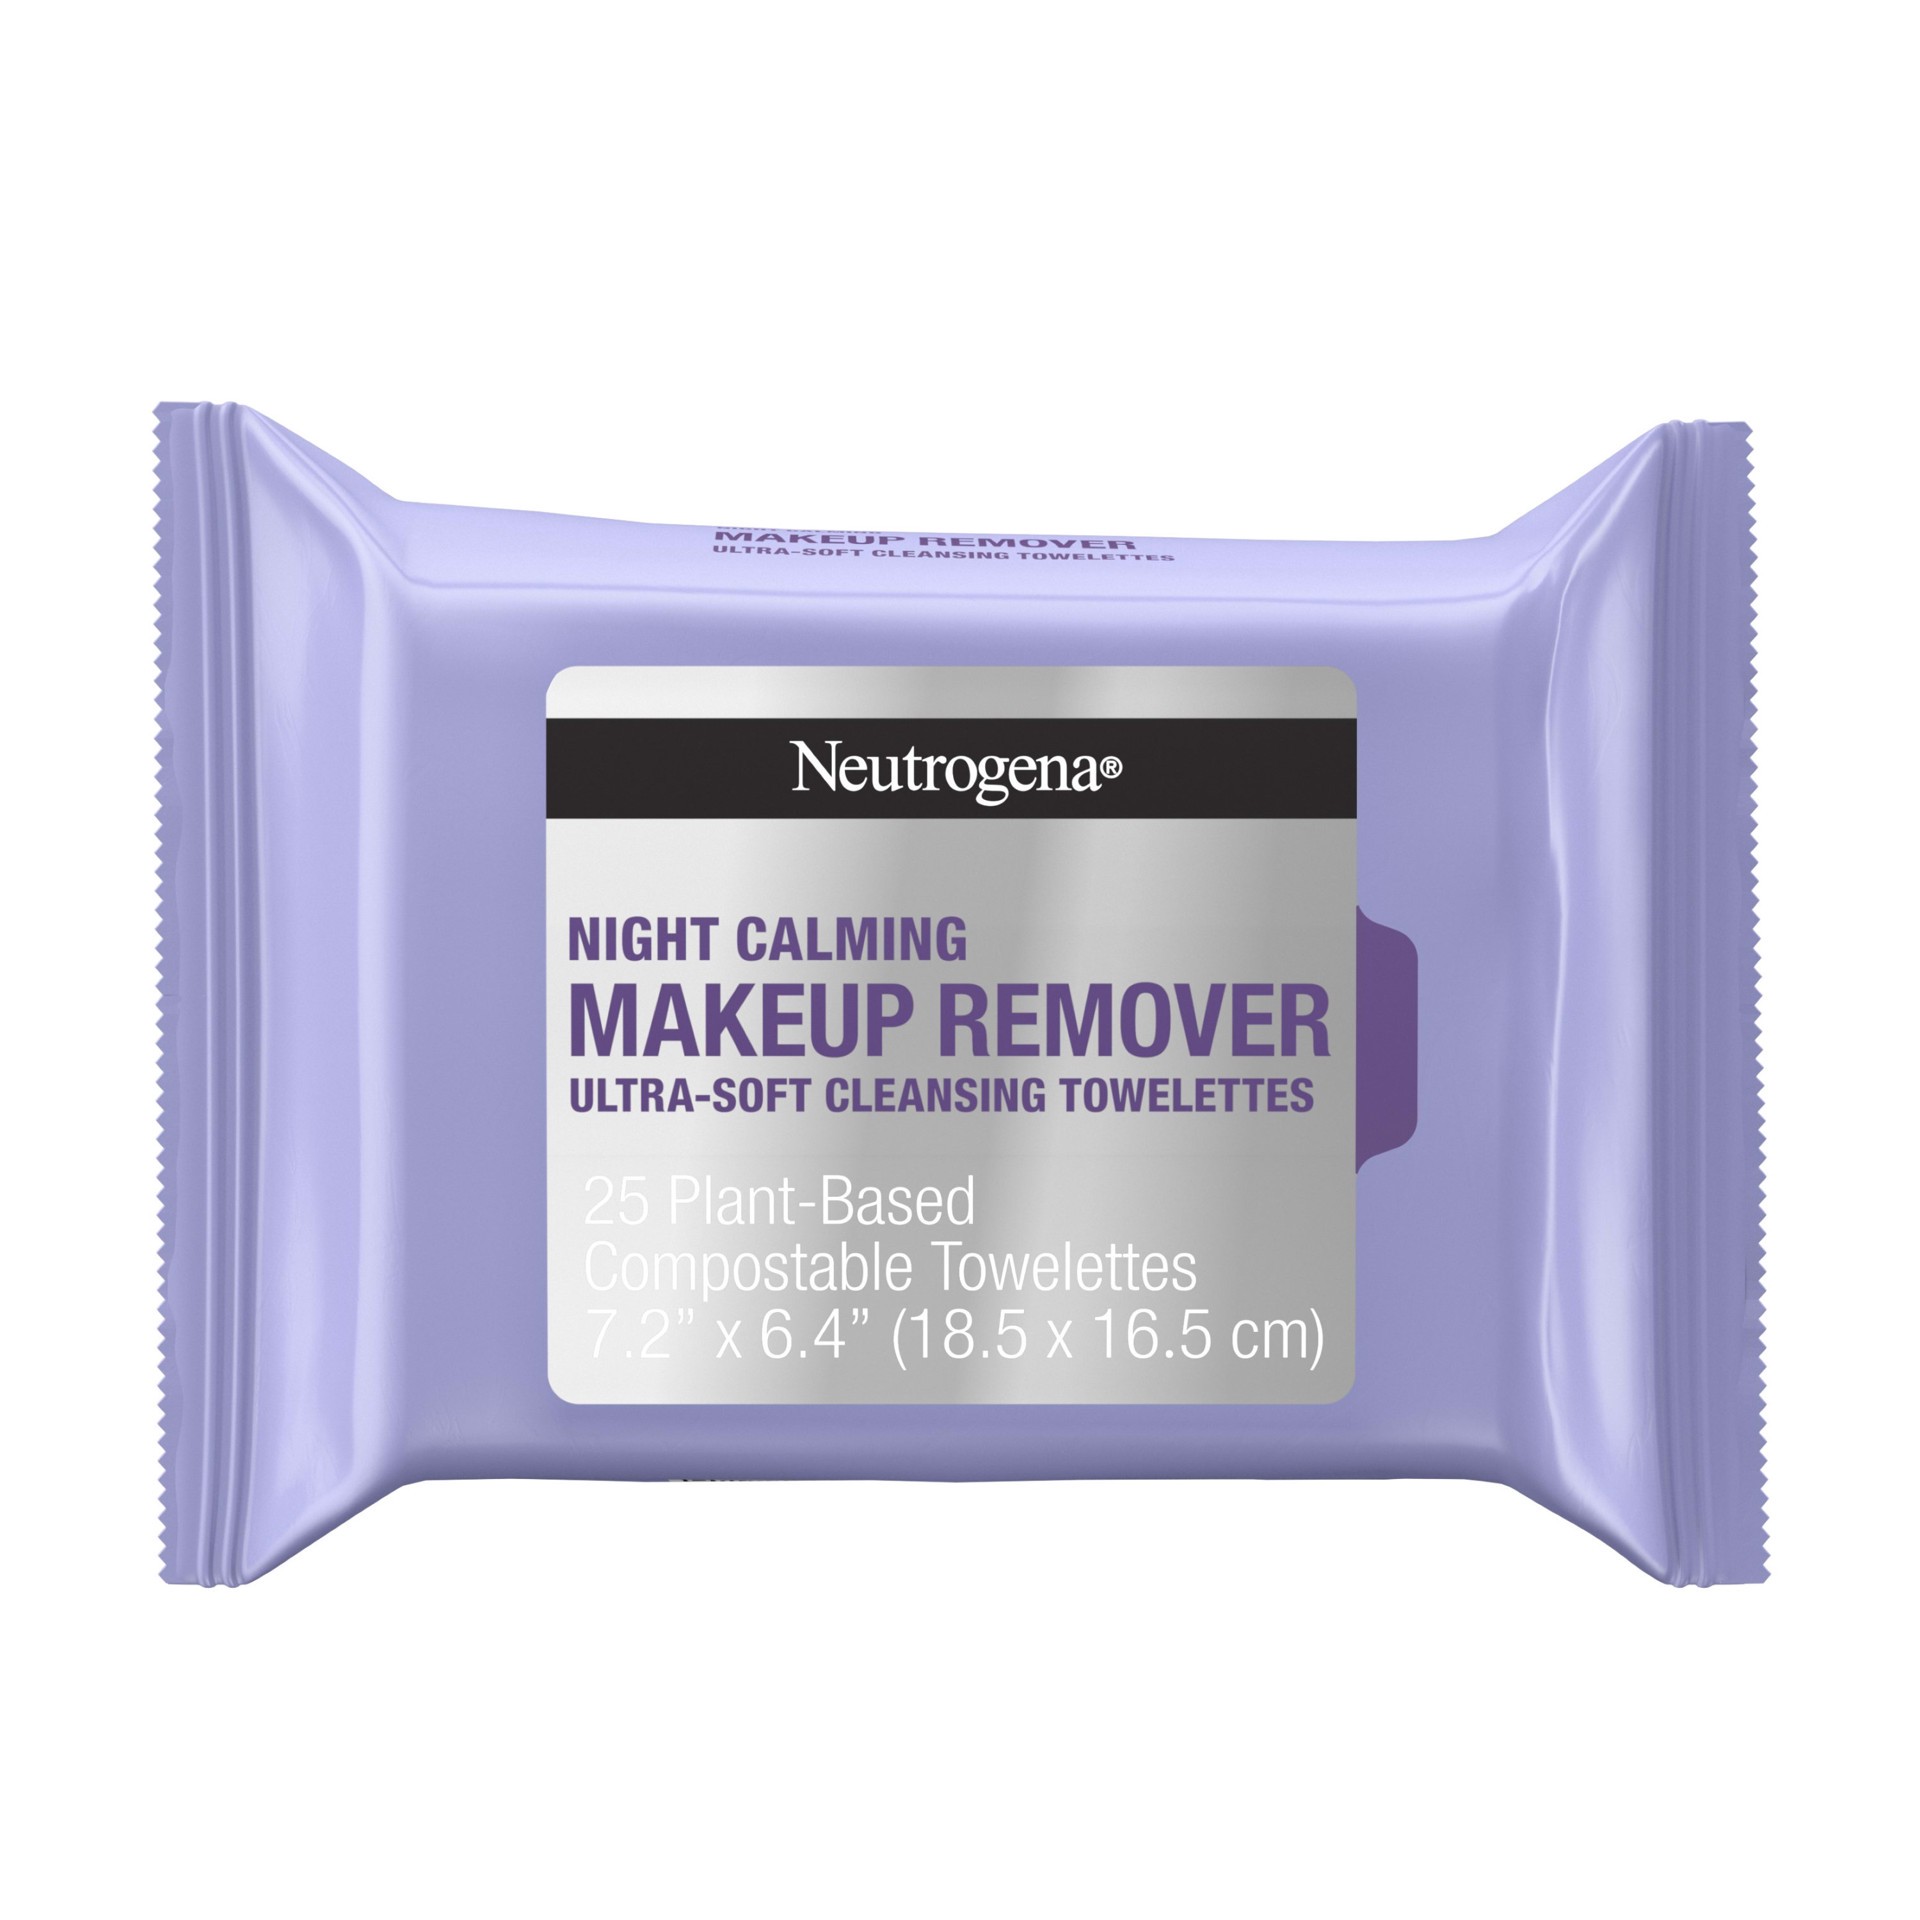 slide 1 of 6, Neutrogena Night Calming Cleansing Makeup Remover Face Wipes, Nighttime Facial Towelettes to Remove Sweat, Dirt & makeup, Leaves Skin Feeling Calm, Alcohol-Free, 100% Plant Based Cloth, 25 ct